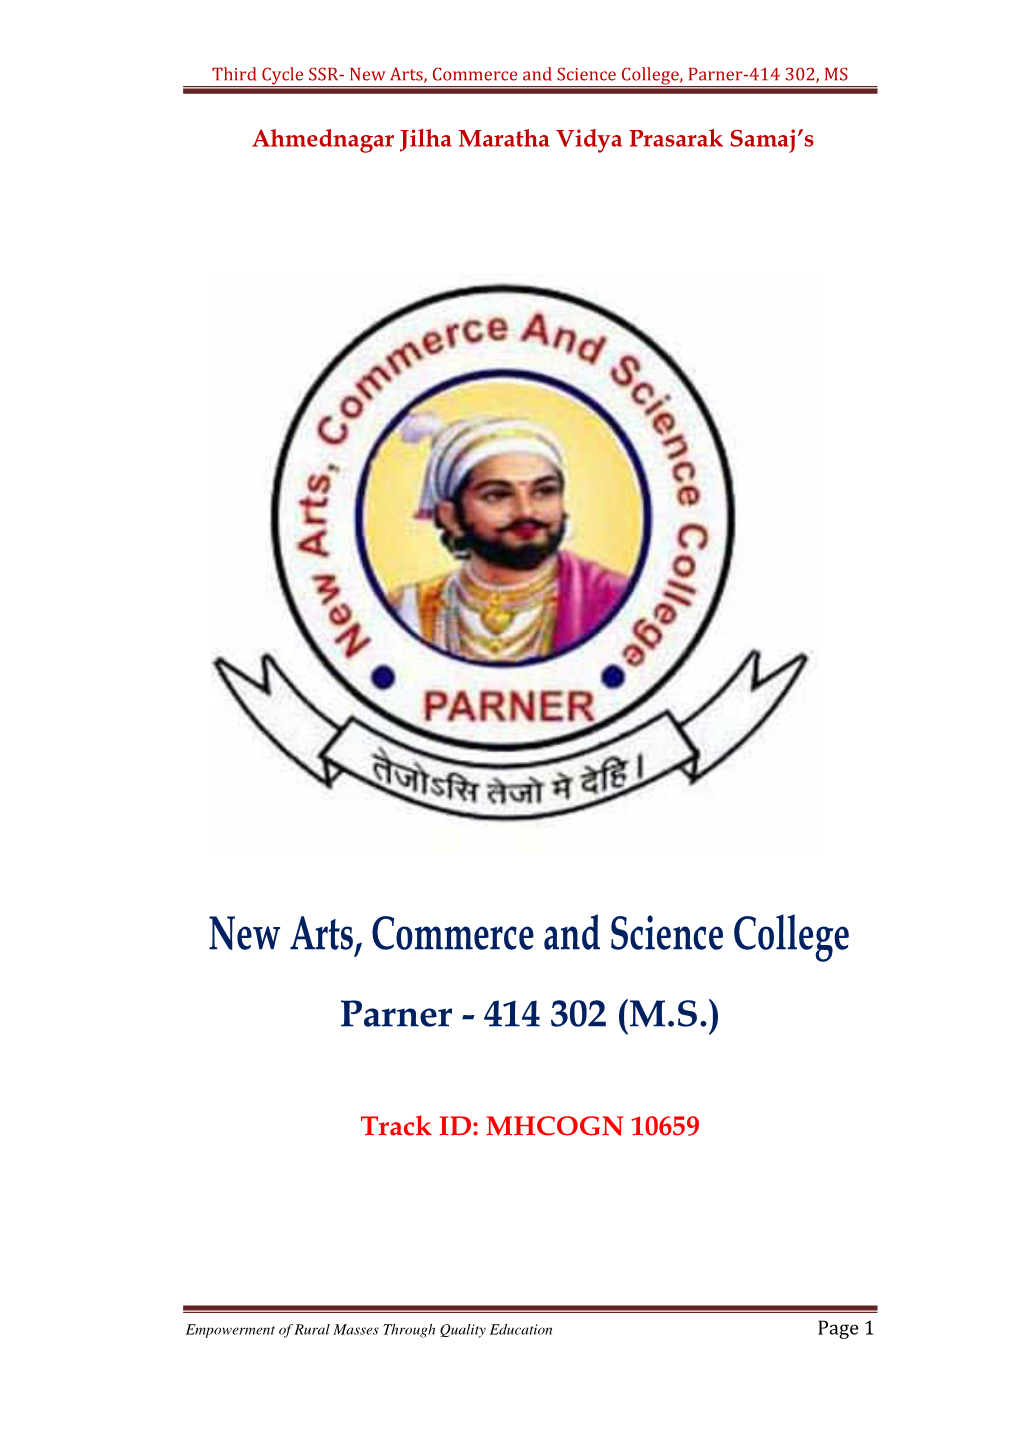 New Arts, Commerce and Science College, Parner-414 302, MS